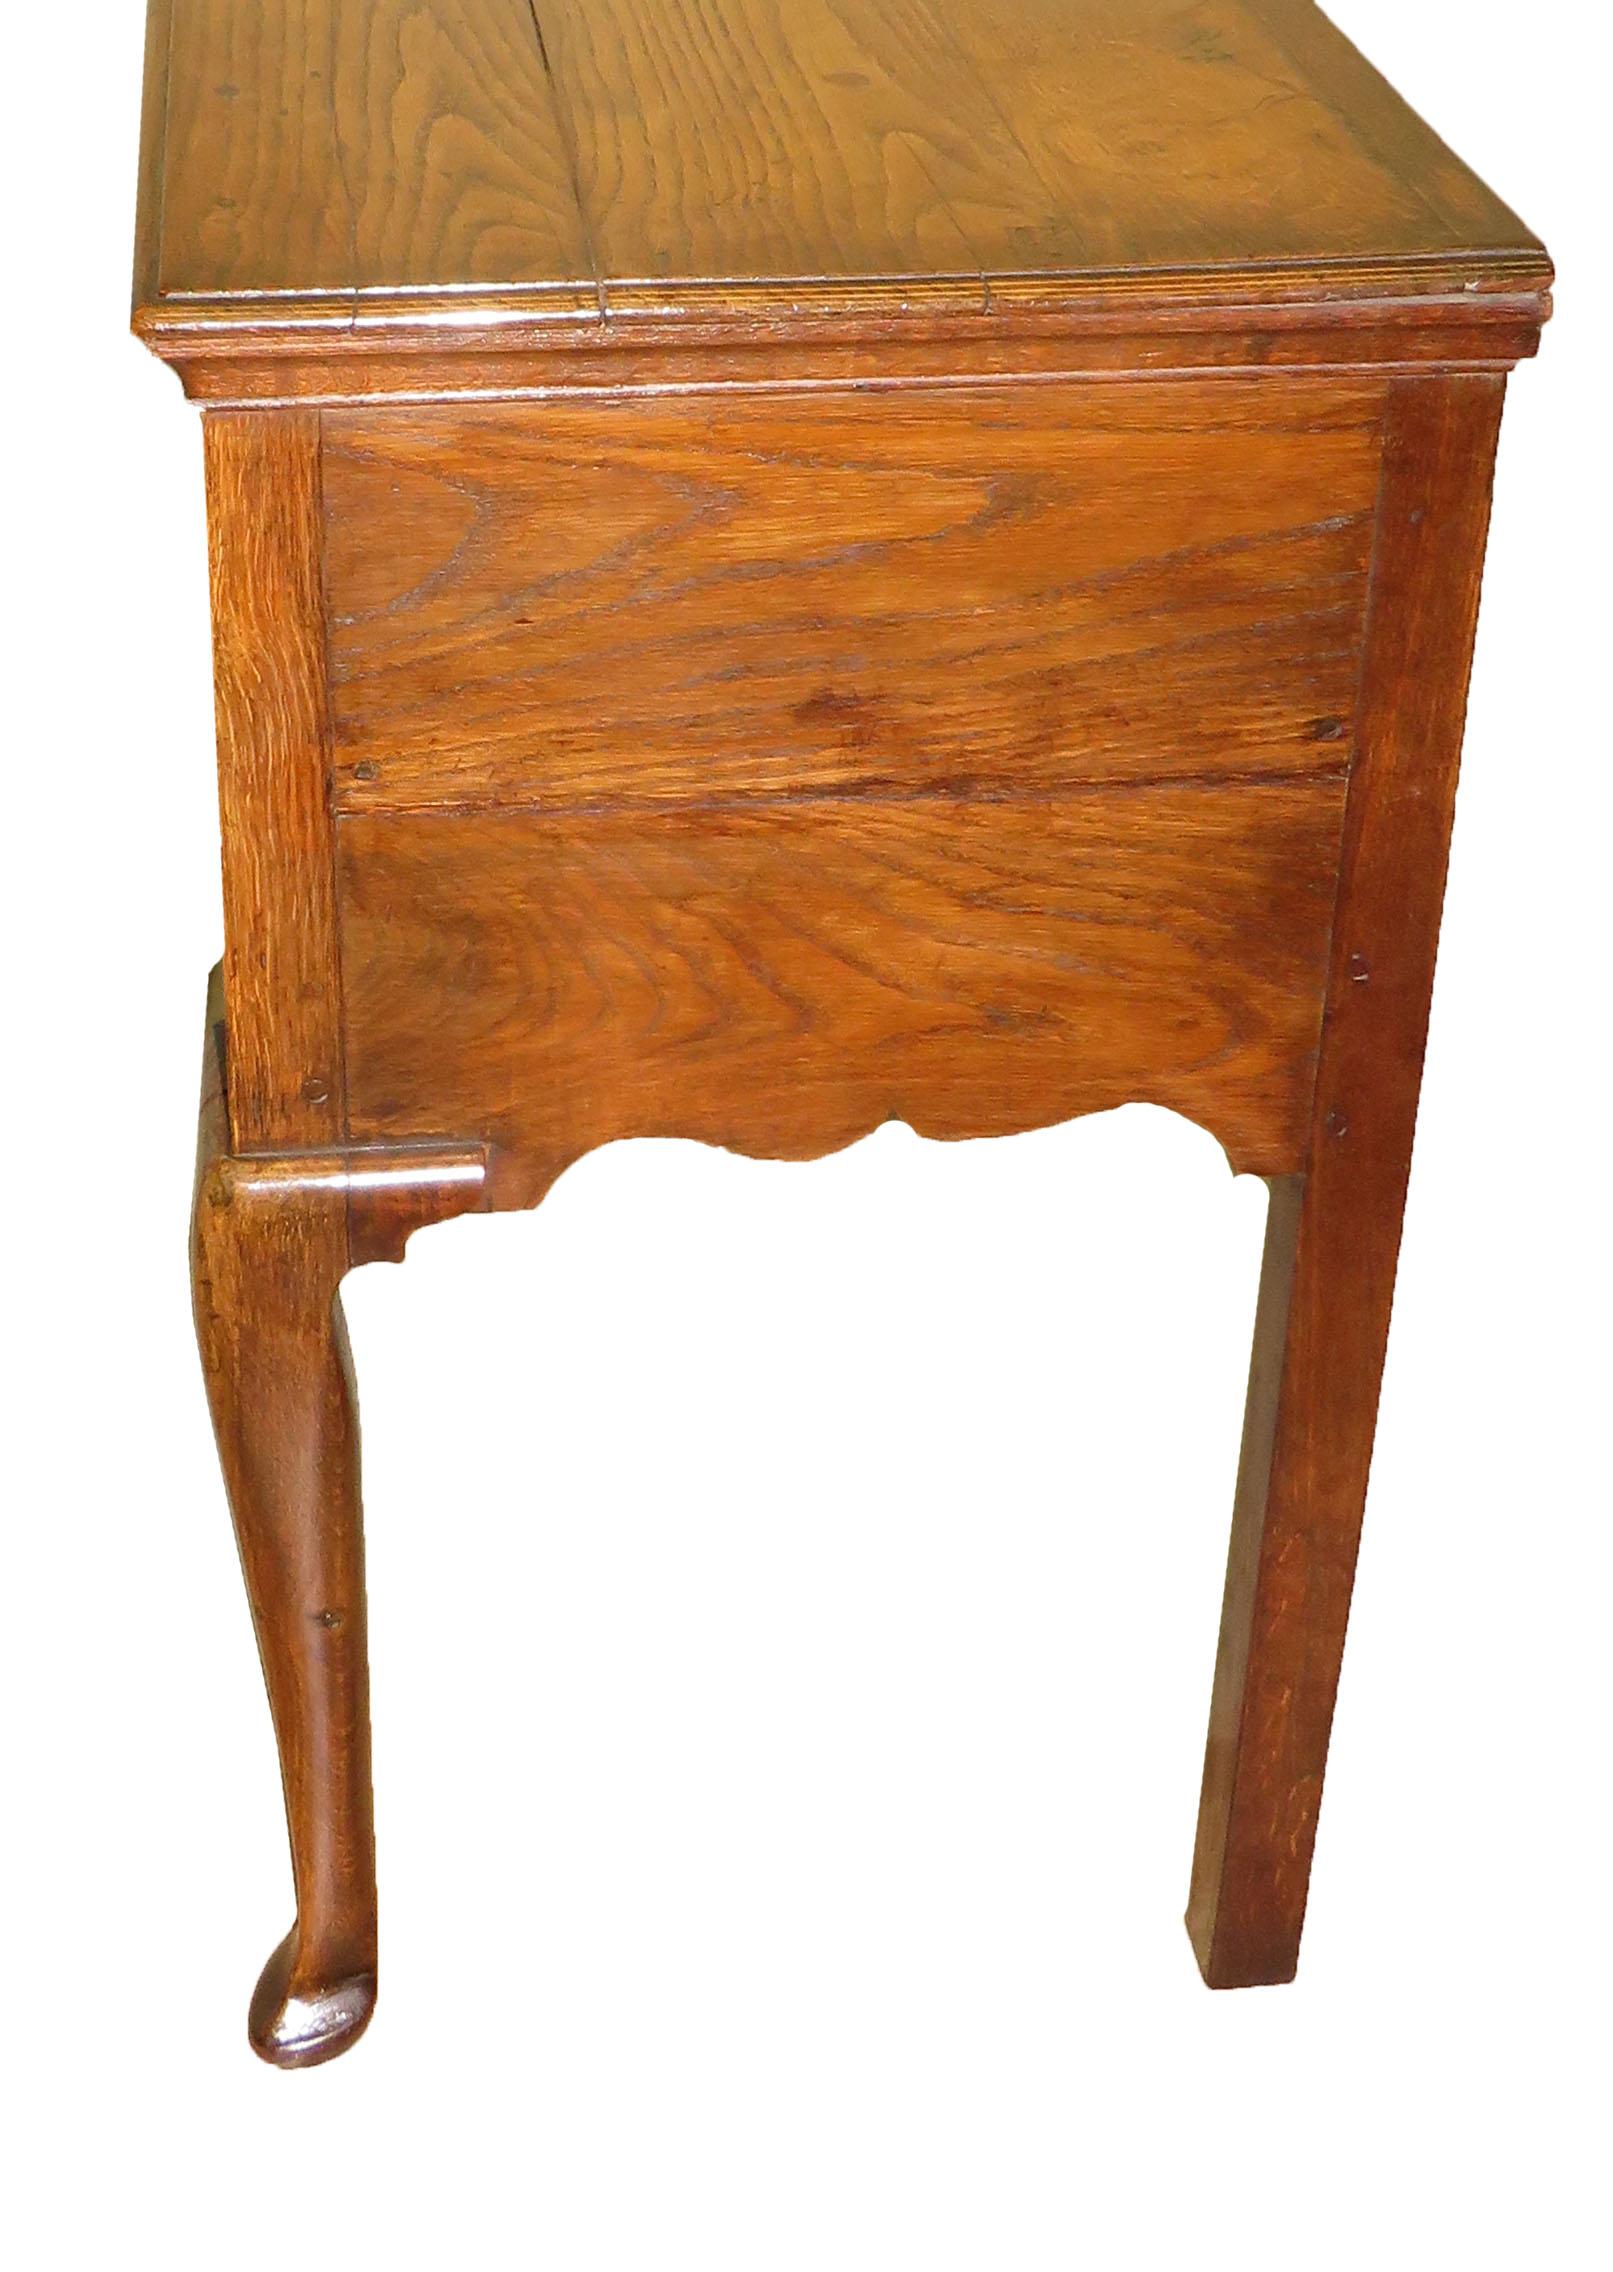 An attractive George III period oak dresser base having
Superbly figured top having three frieze drawers with
Mahogany crossbanded decoration & original brass swan
Neck handles above shaped apron with candle drawer
Raised on elegant cabriole